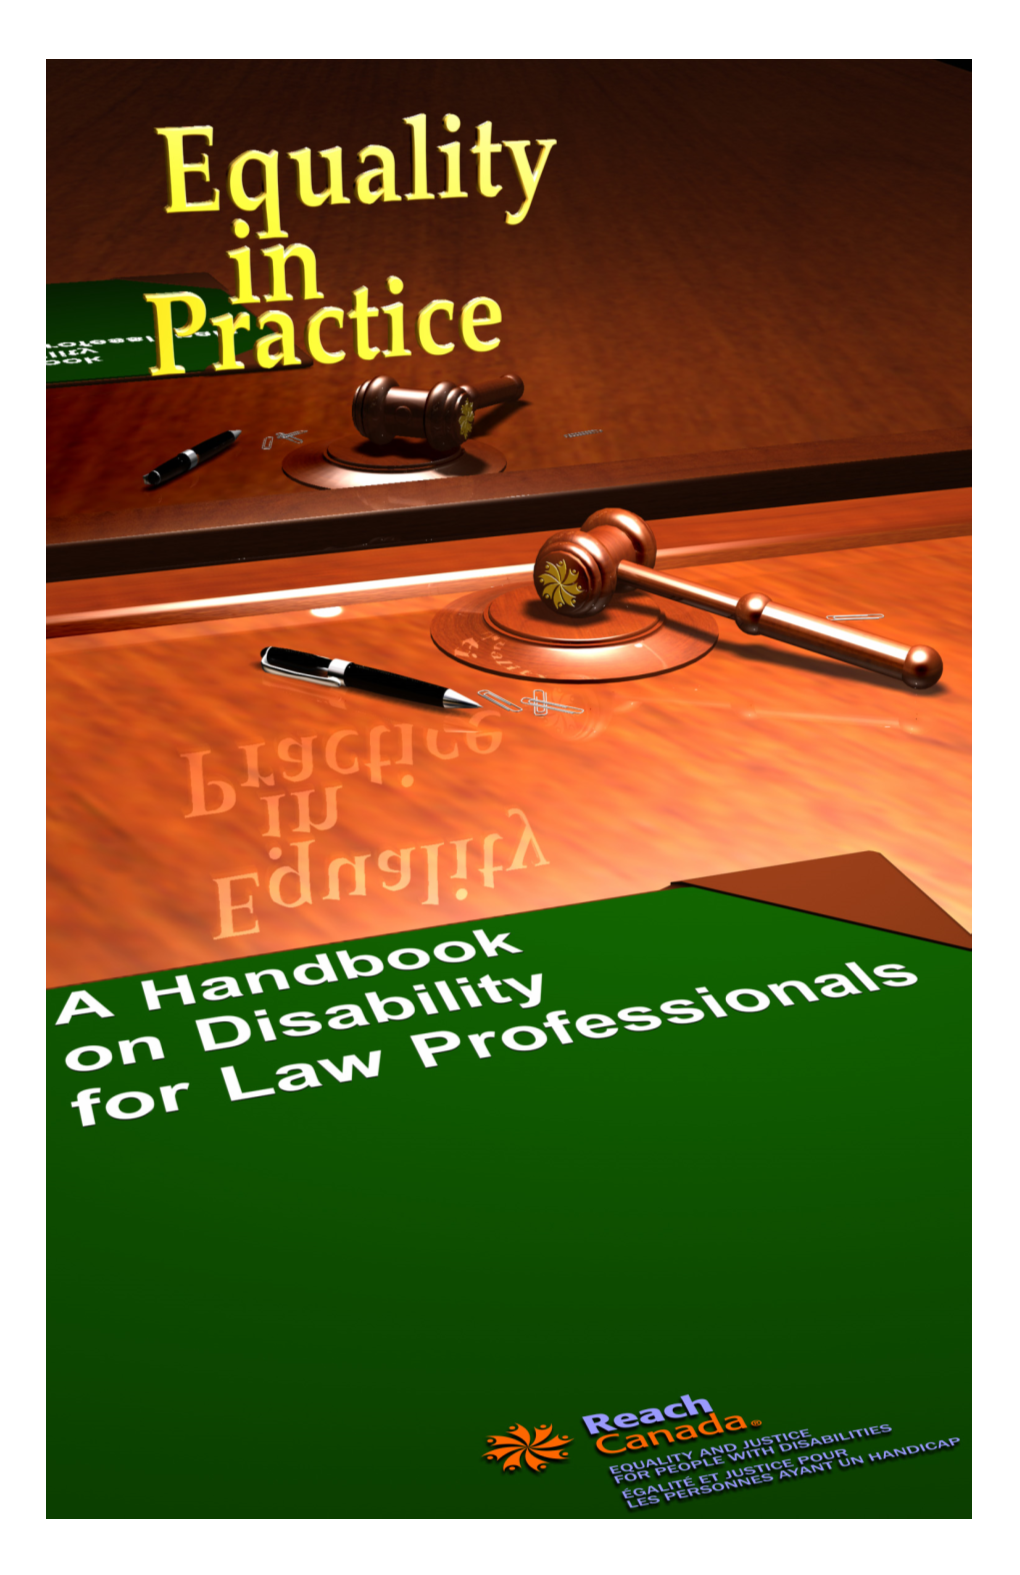 A Handbook on Disability for Law Professionals